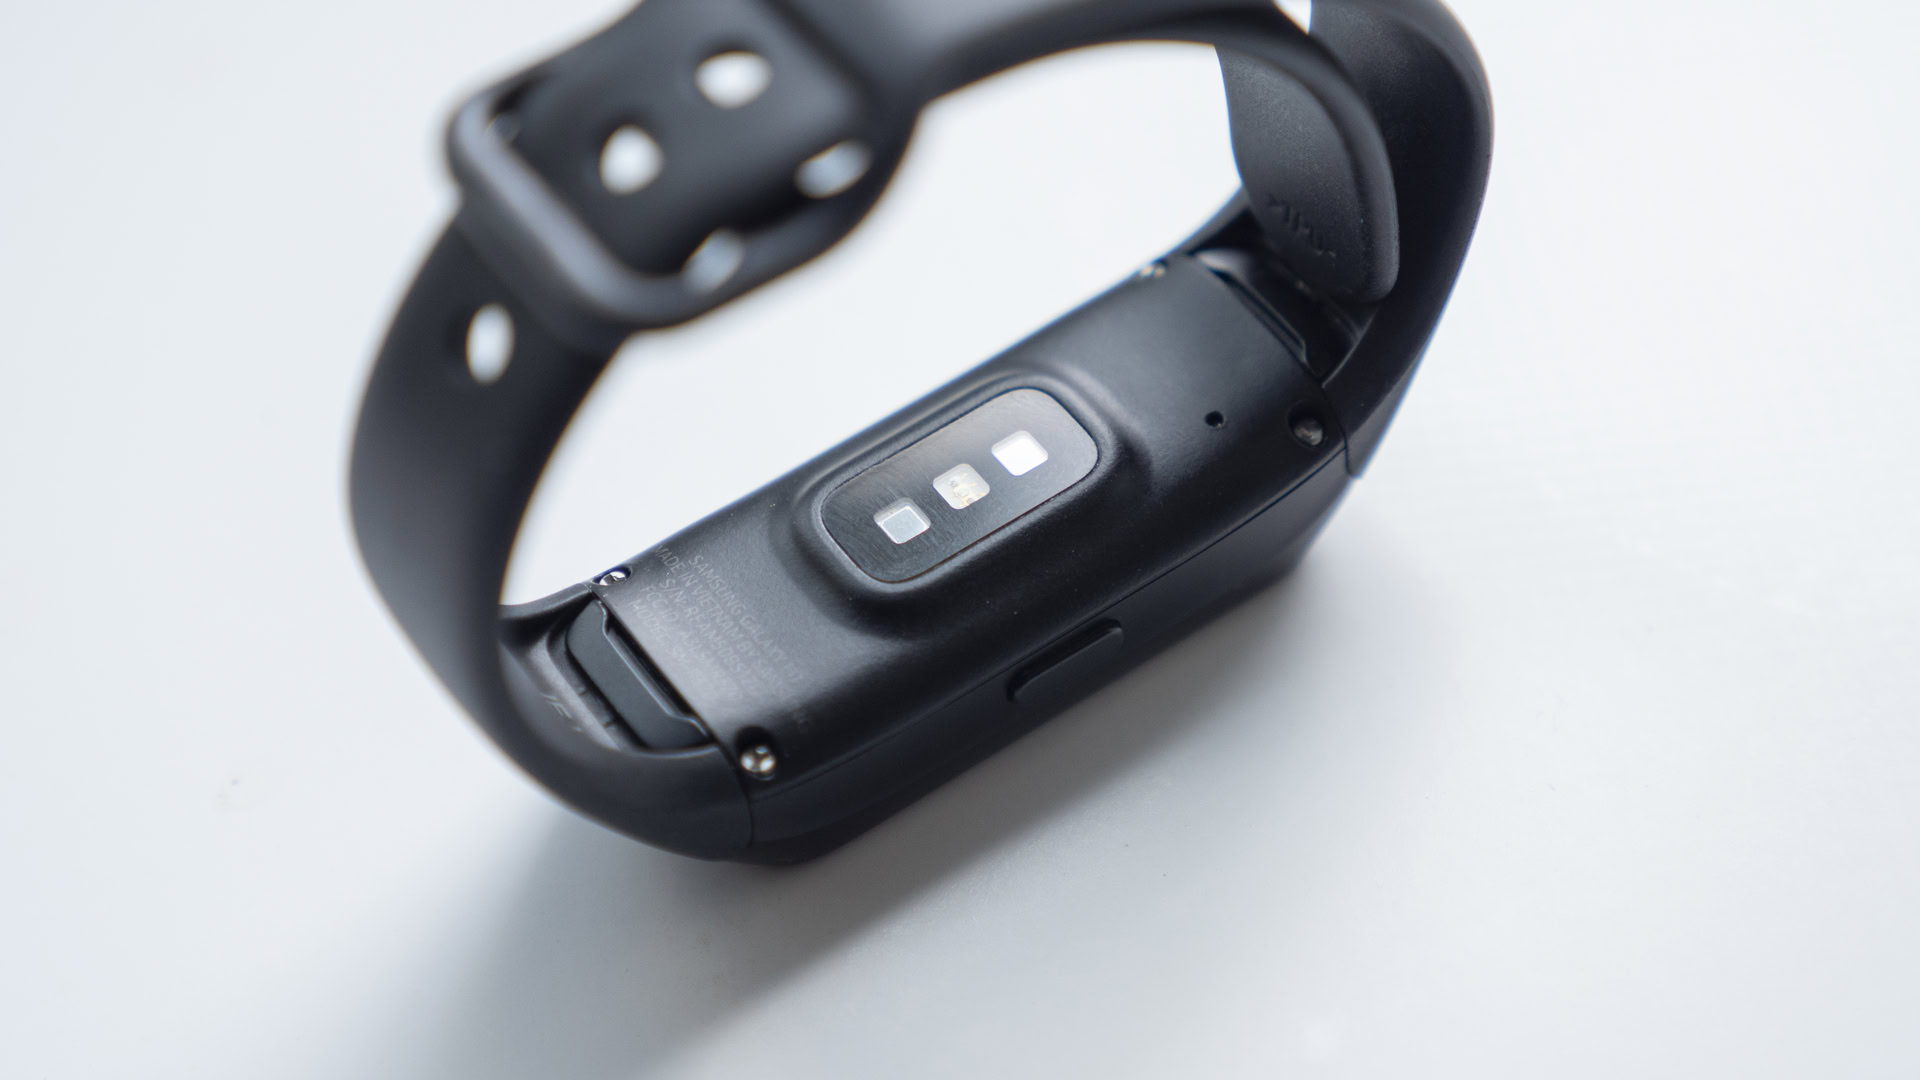 Samsung Galaxy Fit review: Is Samsung's fitness tracker worth it?